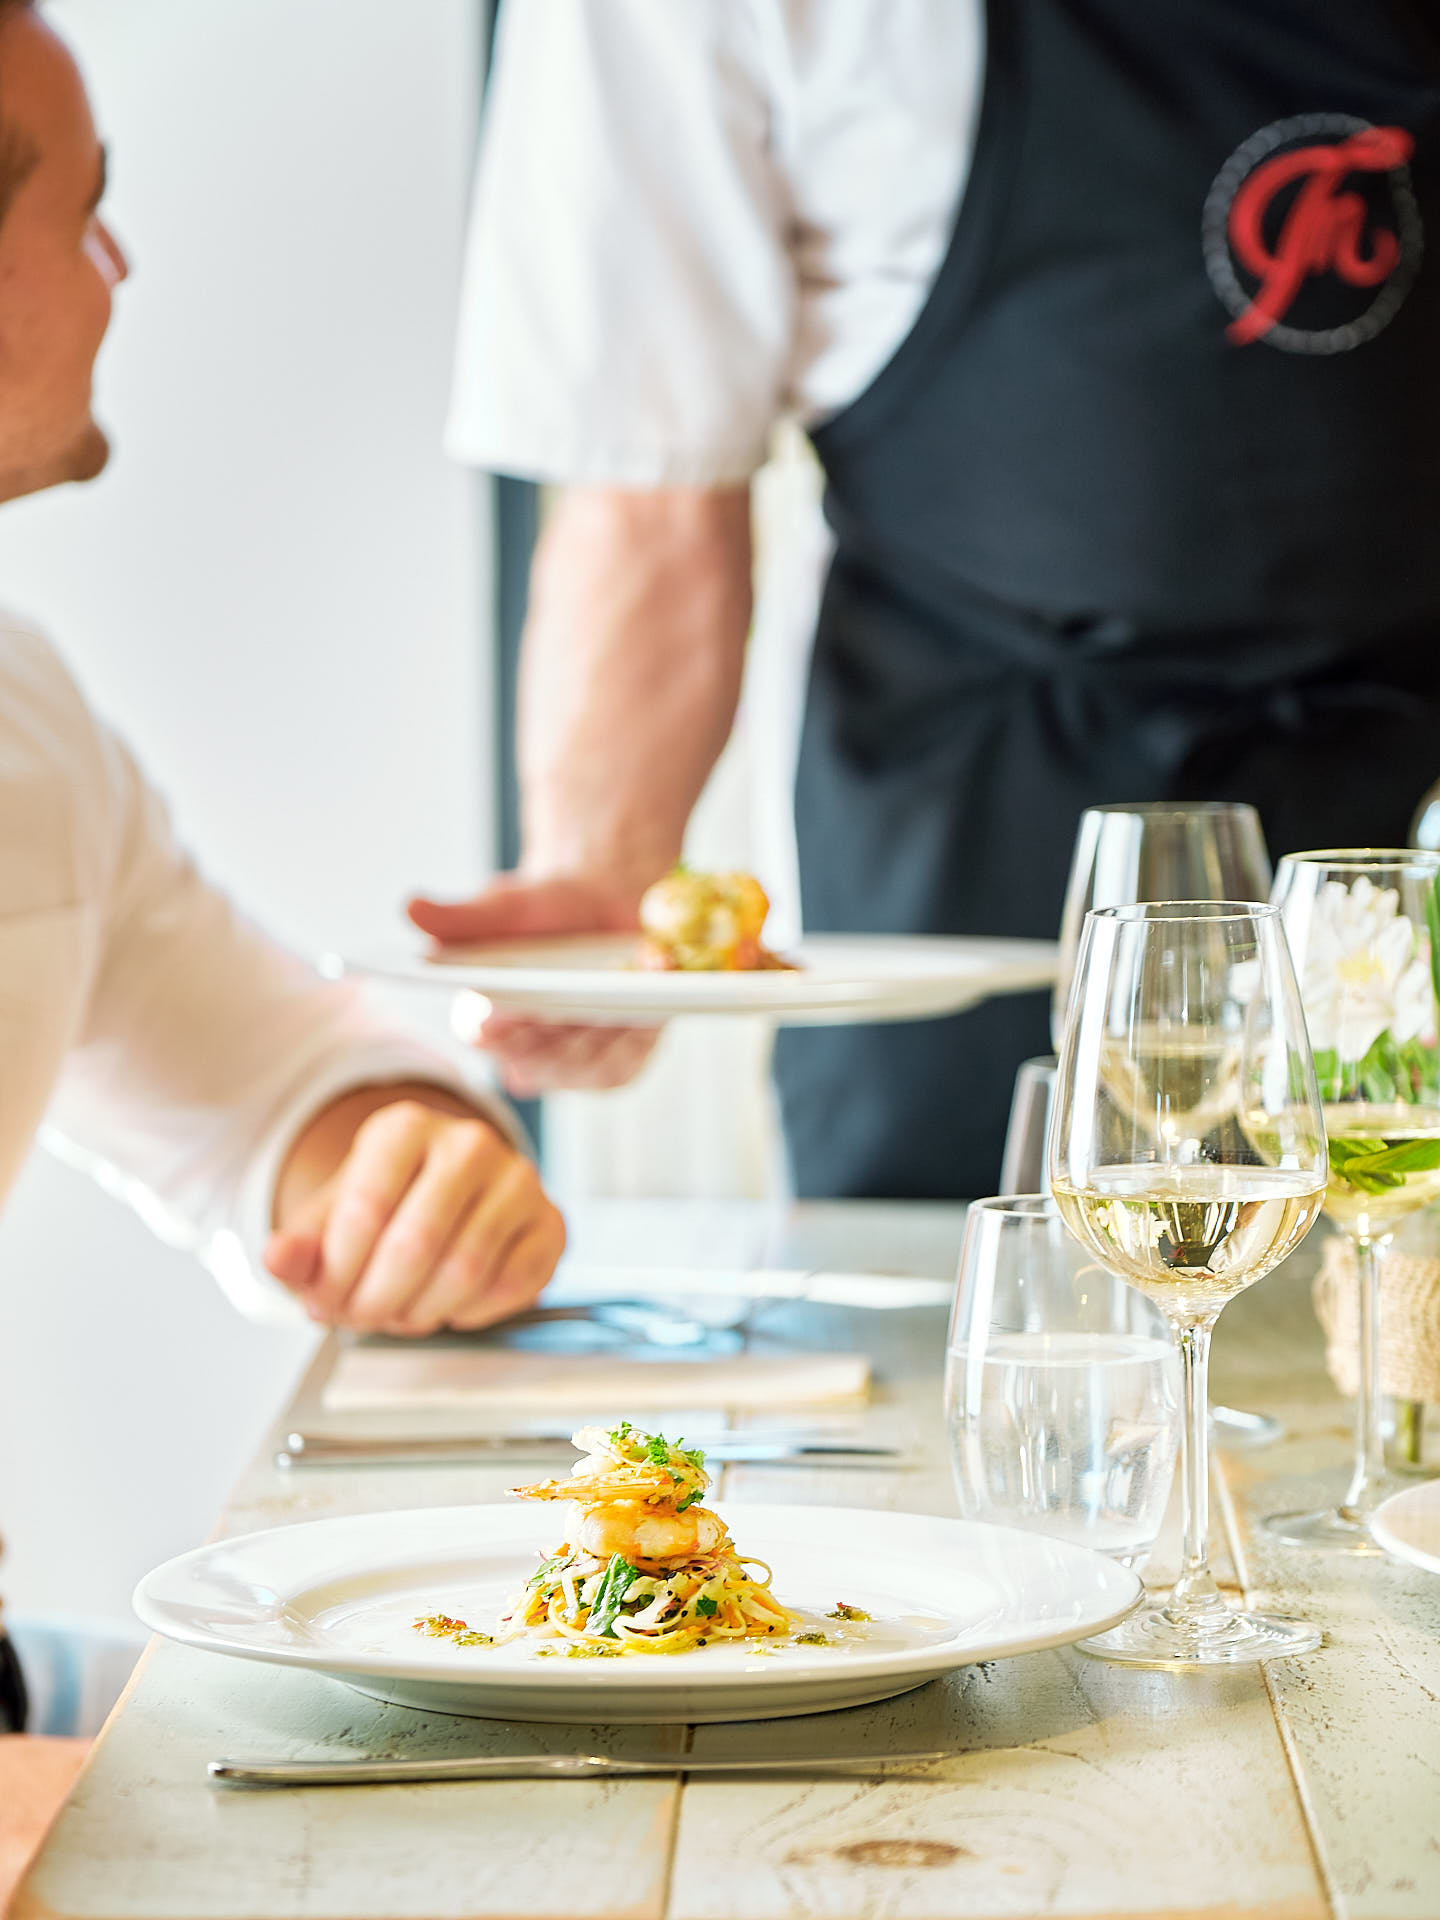 A chef brings food to to the table with a smiling customer looking up at him.